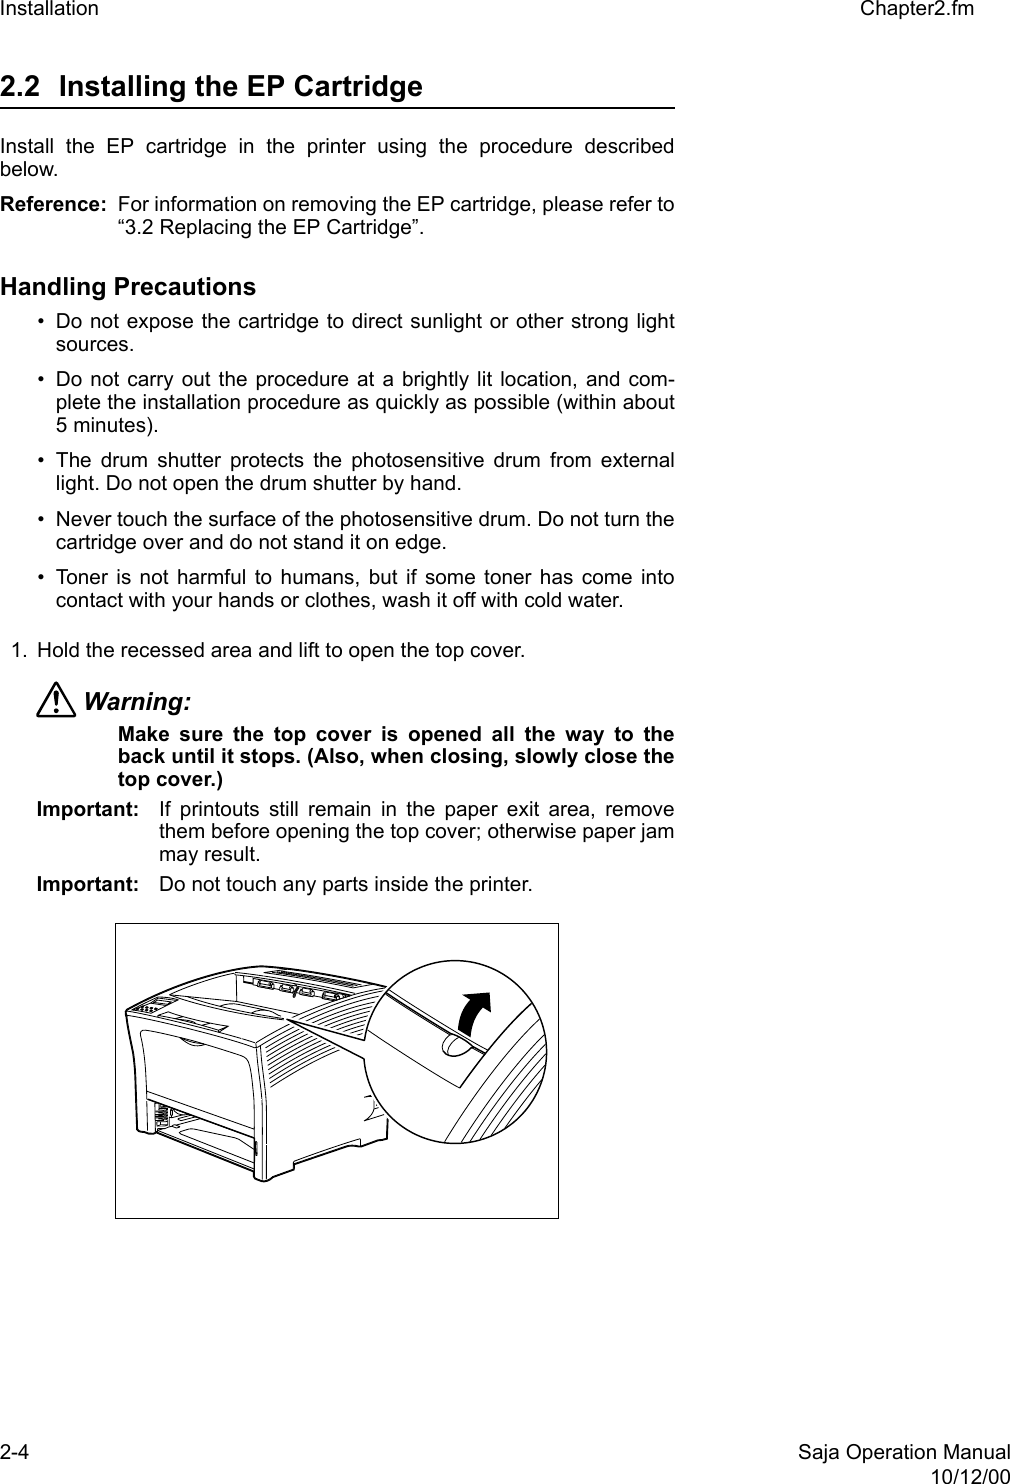 2-4 Saja Operation Manual10/12/00Installation Chapter2.fm2.2 Installing the EP Cartridge Install the EP cartridge in the printer using the procedure describedbelow. Reference: For information on removing the EP cartridge, please refer to“3.2 Replacing the EP Cartridge”.Handling Precautions • Do not expose the cartridge to direct sunlight or other strong lightsources. • Do not carry out the procedure at a brightly lit location, and com-plete the installation procedure as quickly as possible (within about5 minutes). • The drum shutter protects the photosensitive drum from externallight. Do not open the drum shutter by hand. • Never touch the surface of the photosensitive drum. Do not turn thecartridge over and do not stand it on edge. • Toner is not harmful to humans, but if some toner has come intocontact with your hands or clothes, wash it off with cold water.1. Hold the recessed area and lift to open the top cover. Warning: Make sure the top cover is opened all the way to theback until it stops. (Also, when closing, slowly close thetop cover.) Important: If printouts still remain in the paper exit area, removethem before opening the top cover; otherwise paper jammay result.Important: Do not touch any parts inside the printer.